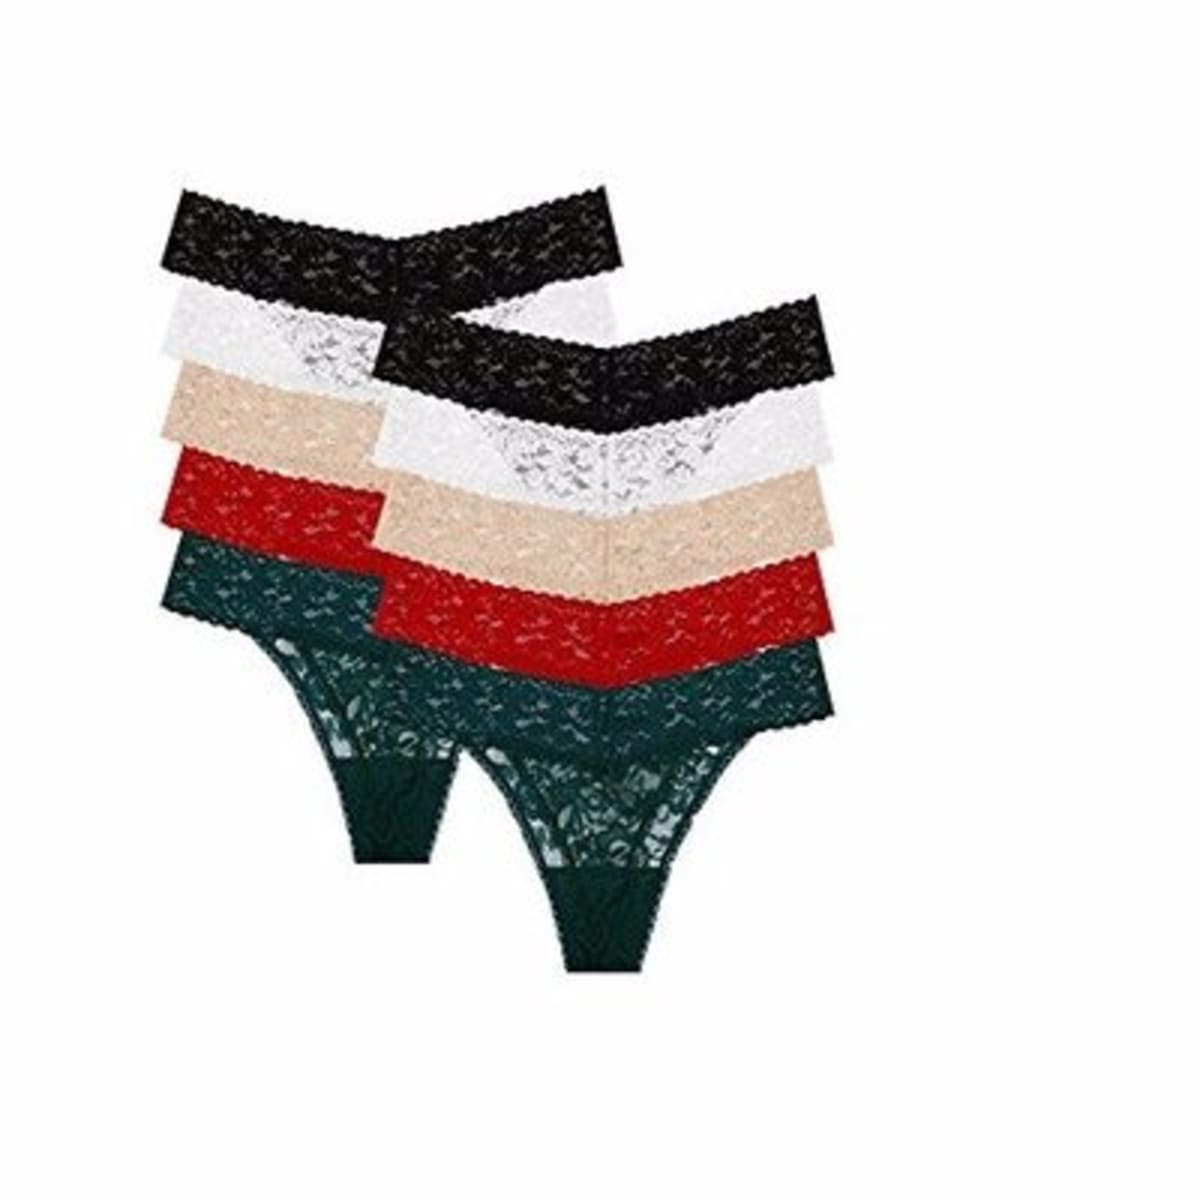 Adelyn Women's Lace Thong Panties -10 in a Pack - Multicolour